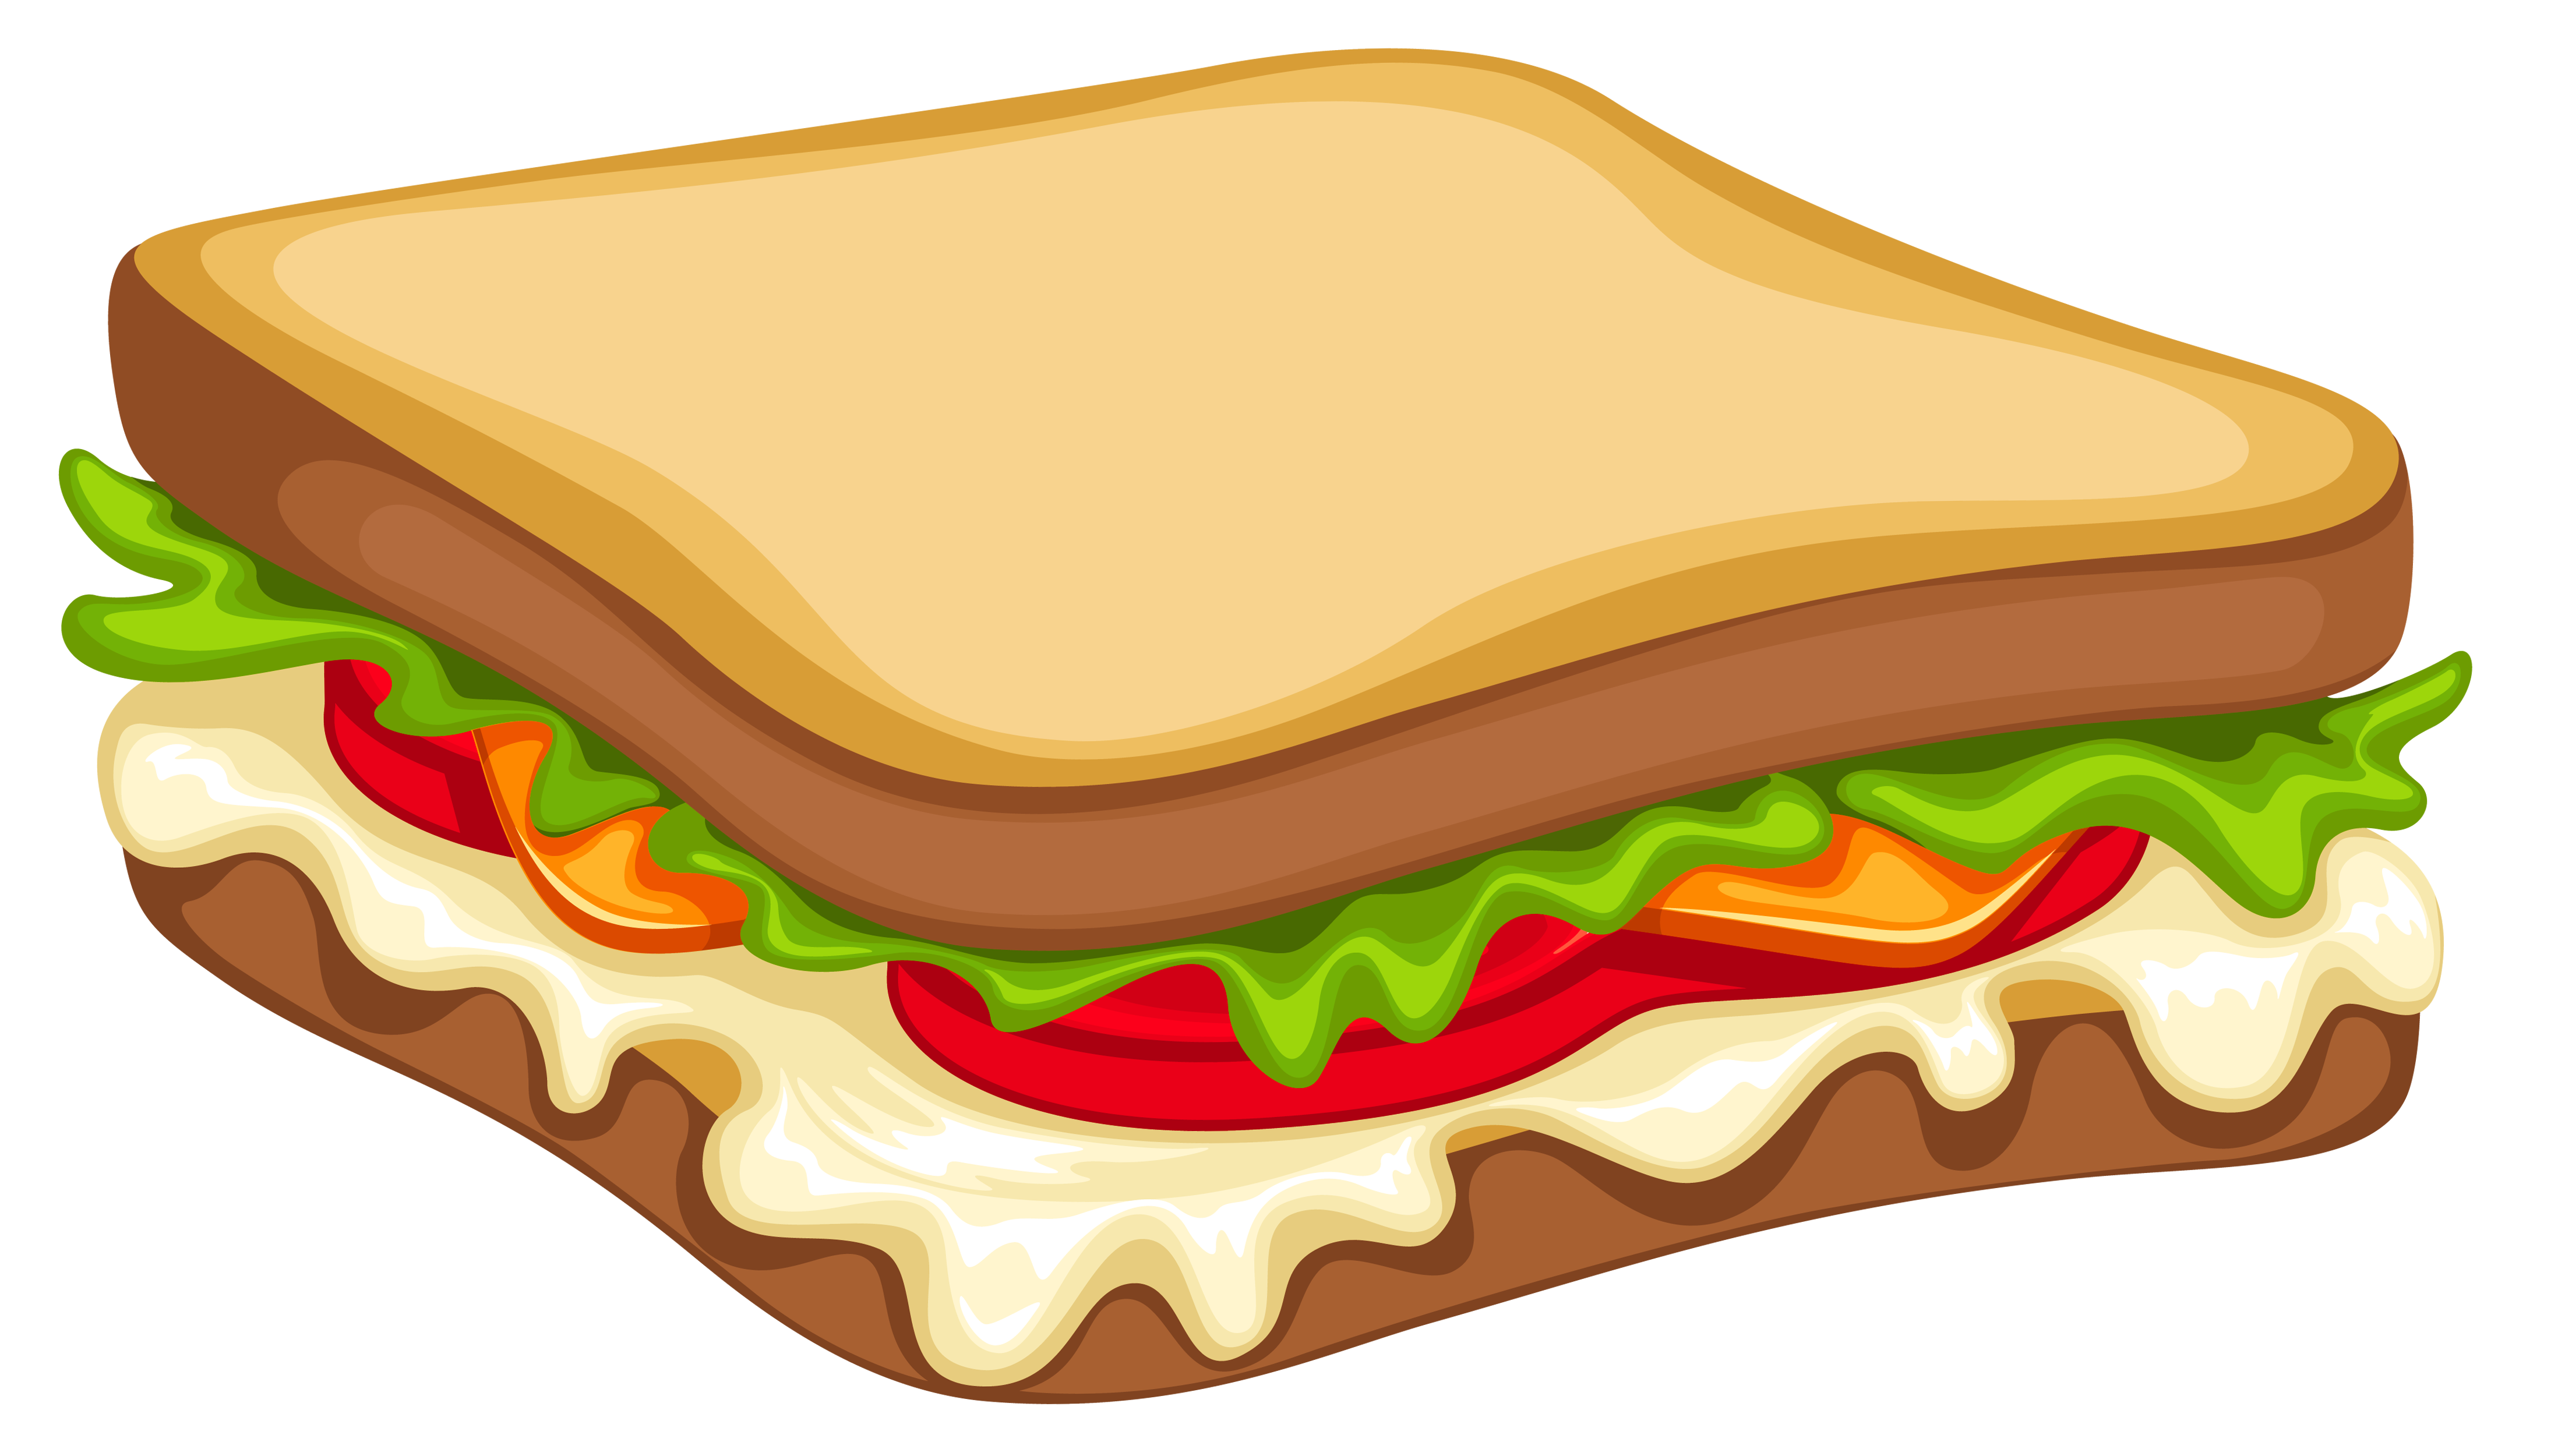 Cheese Sandwich Bacon Free HQ Image PNG Image